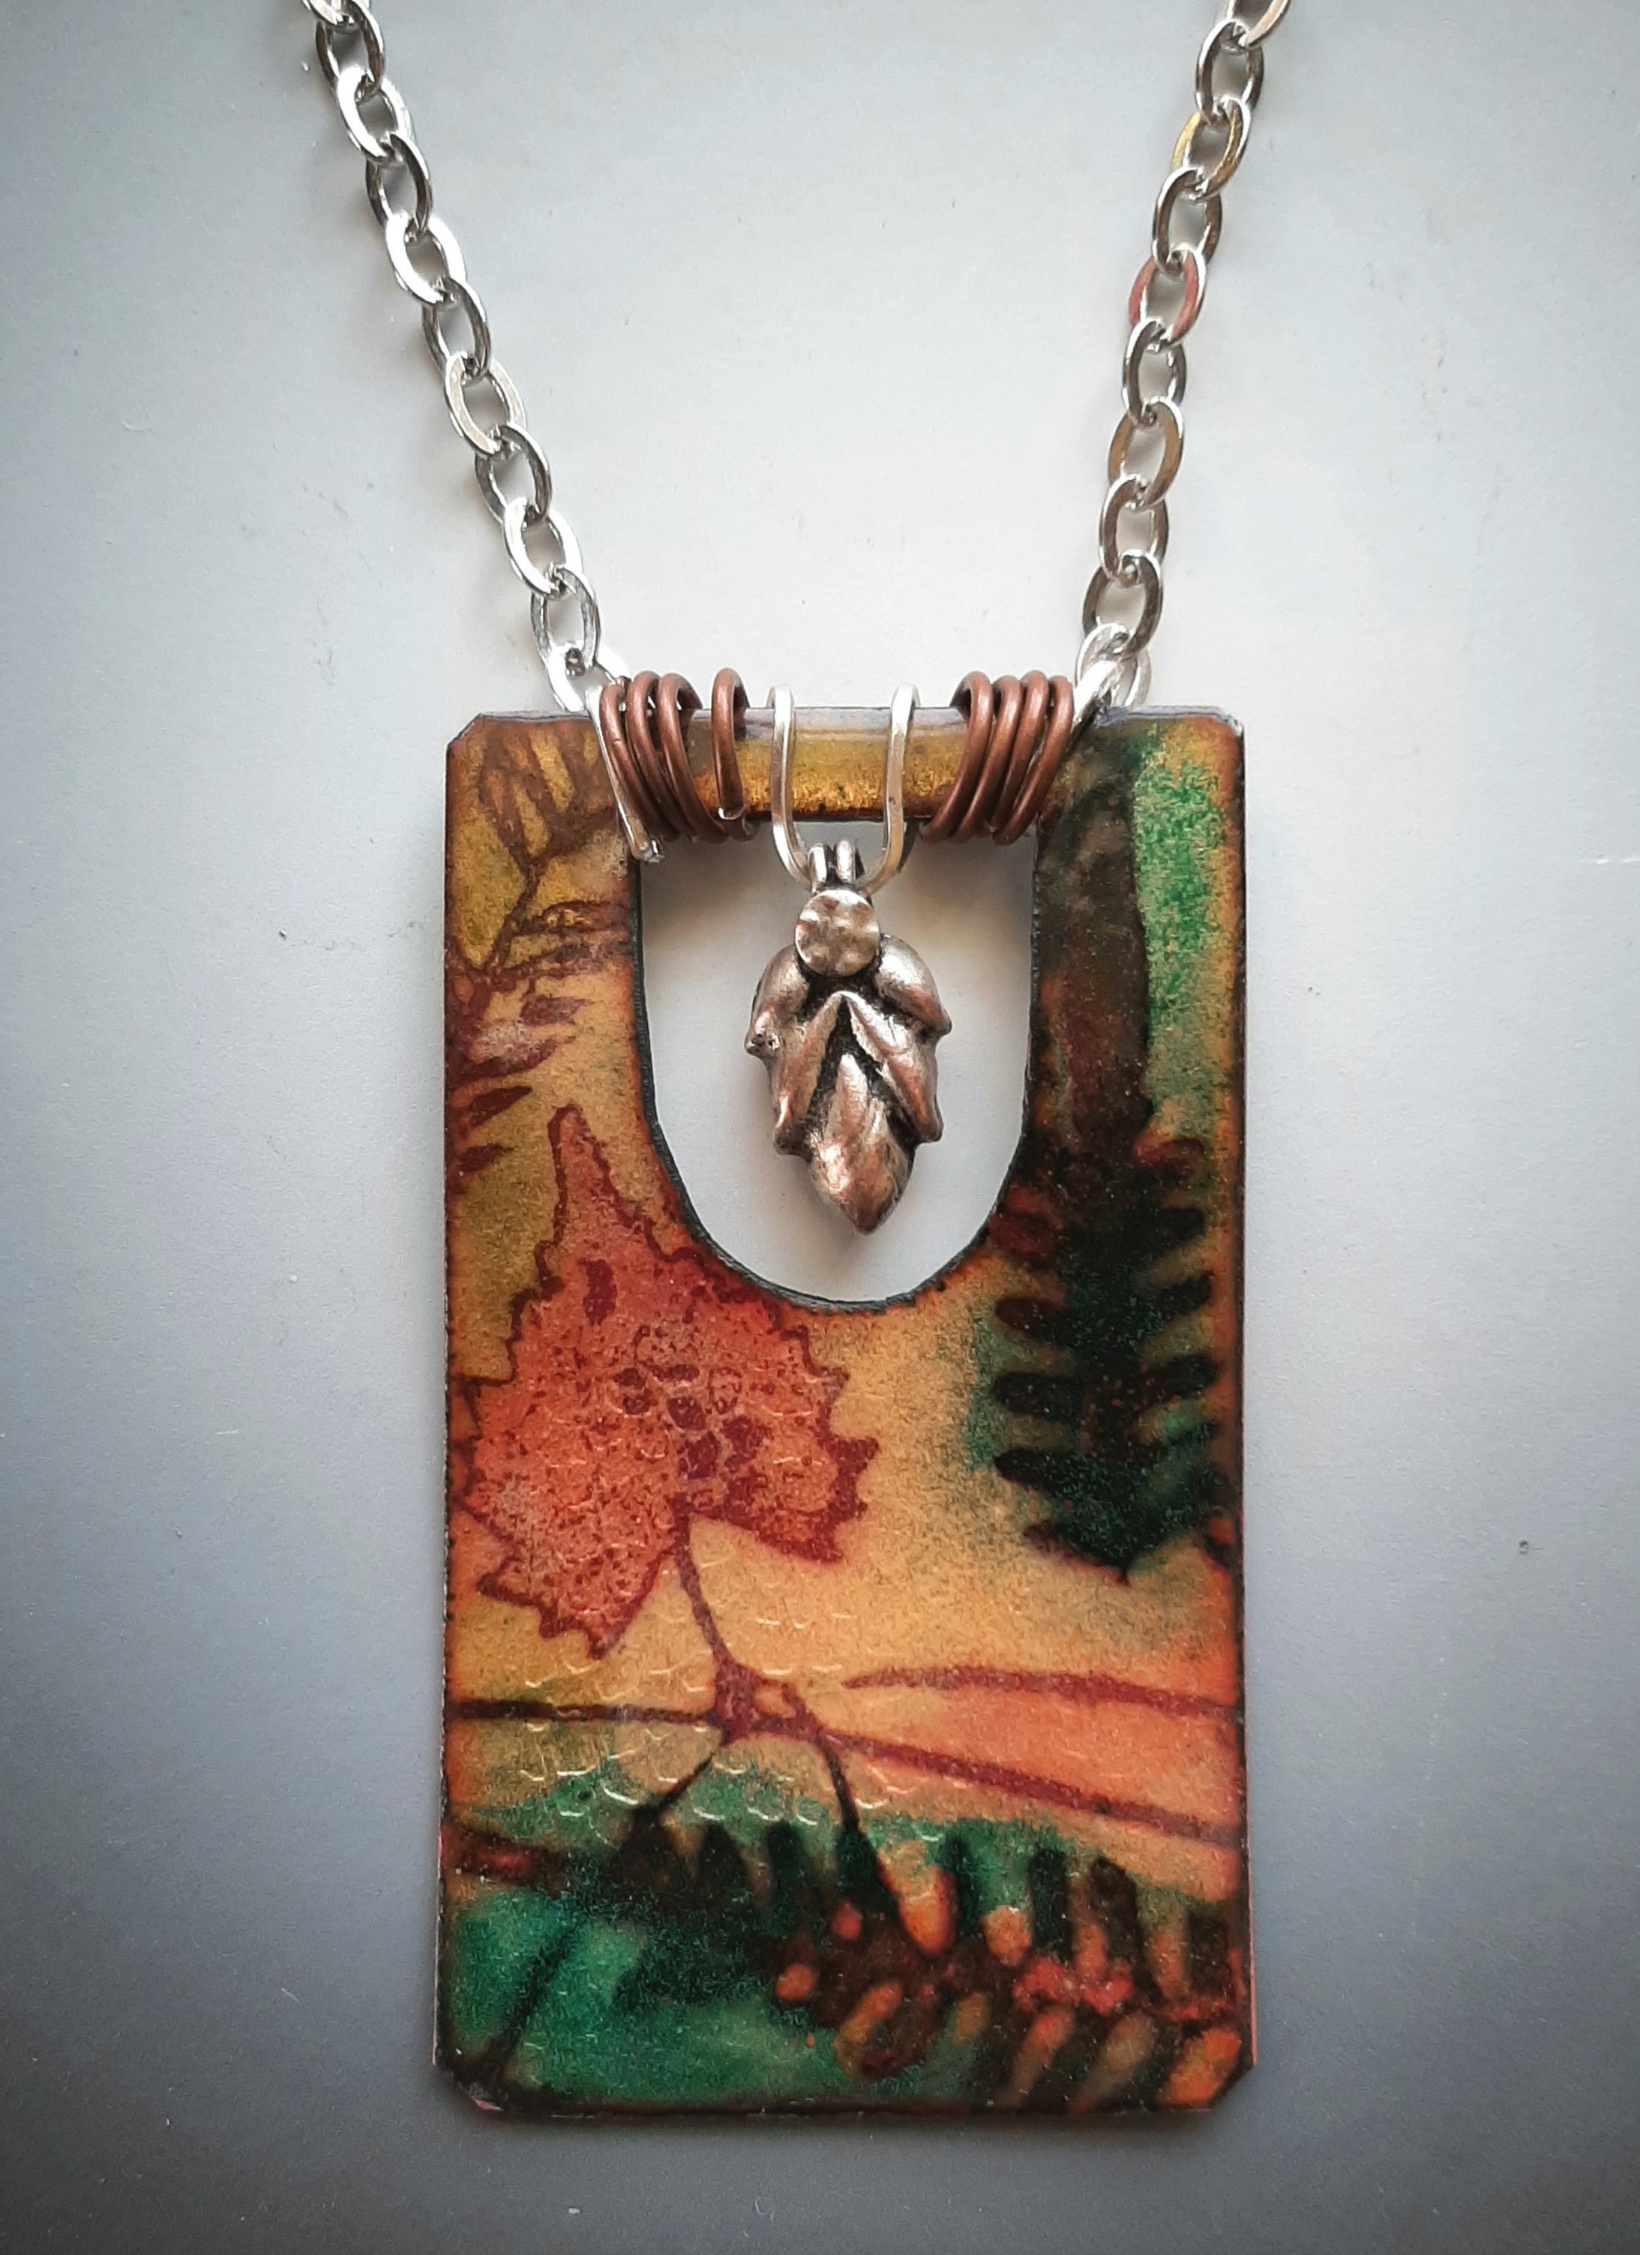 Walk in the Park Necklace